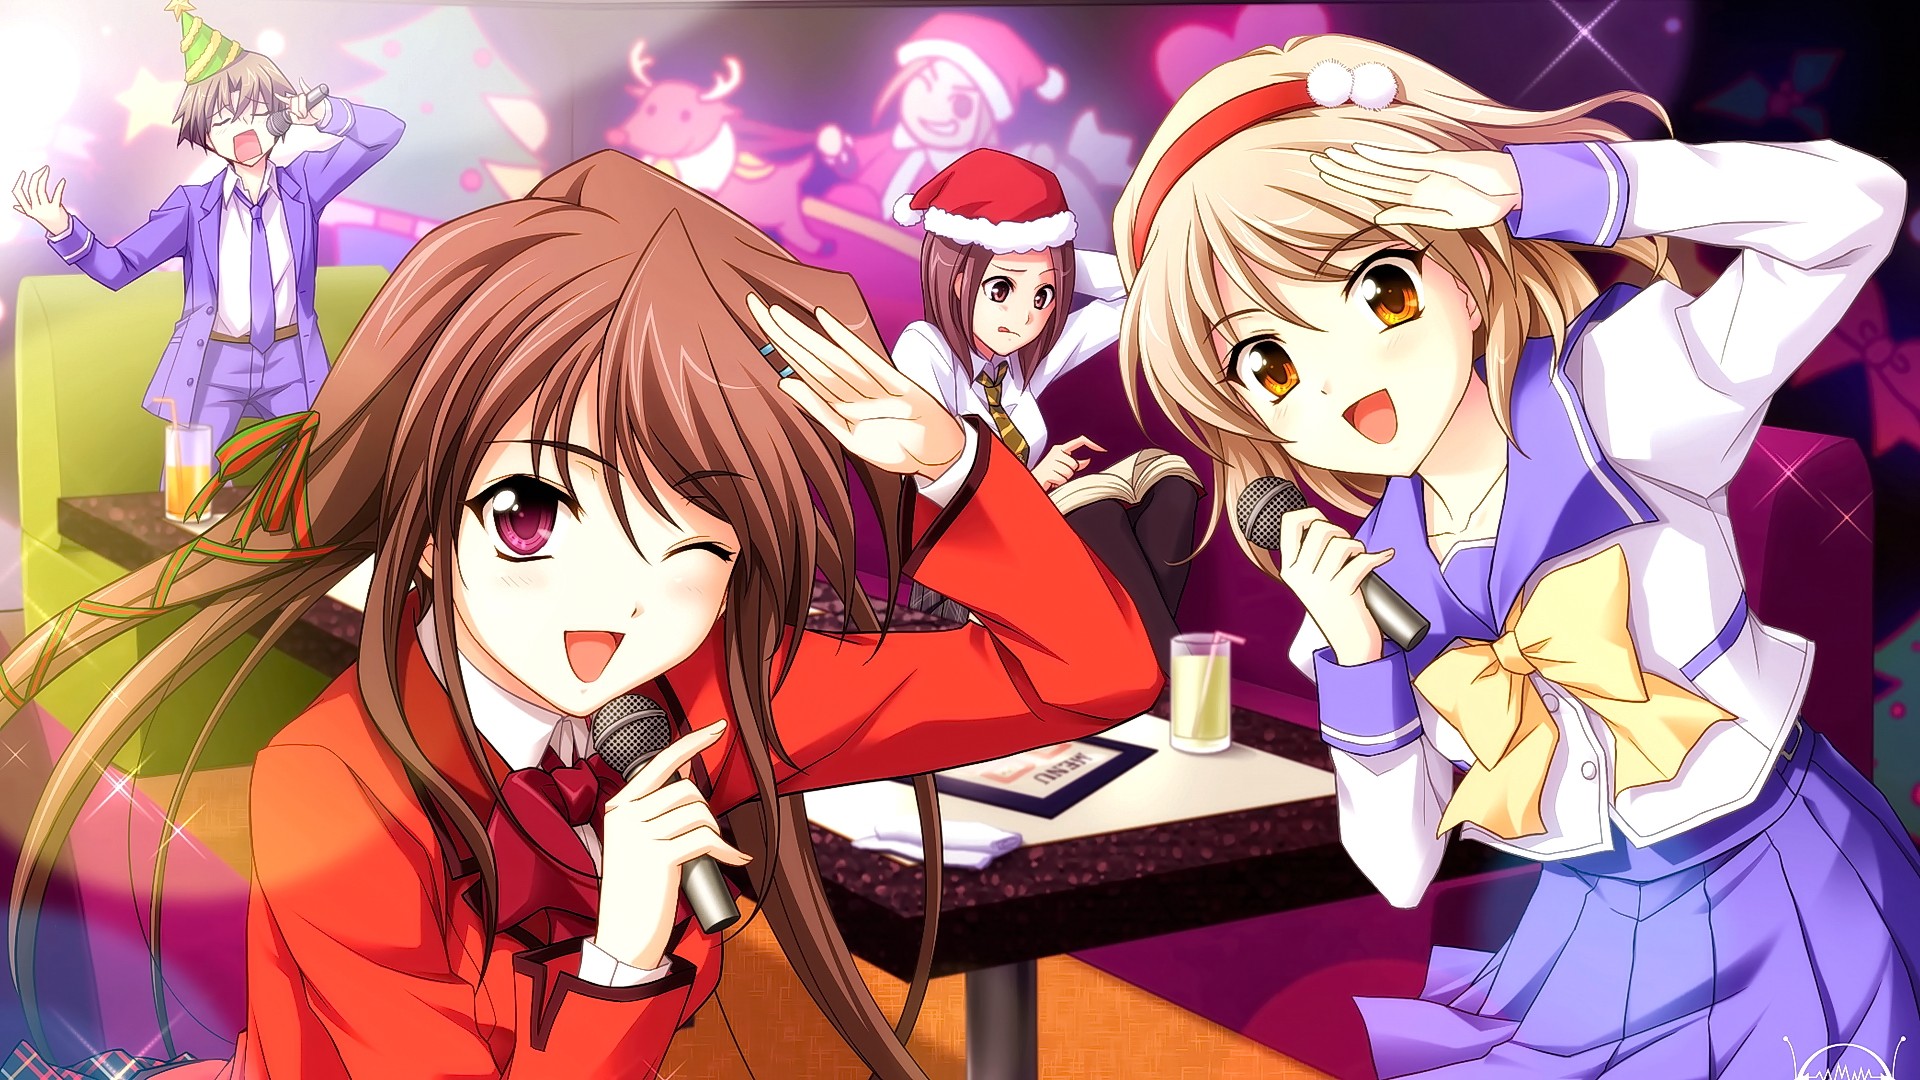 Anime 1920x1080 anime anime girls blonde brunette long hair closed eyes red eyes open mouth smiling school uniform looking at viewer microphone Santa hats one eye closed